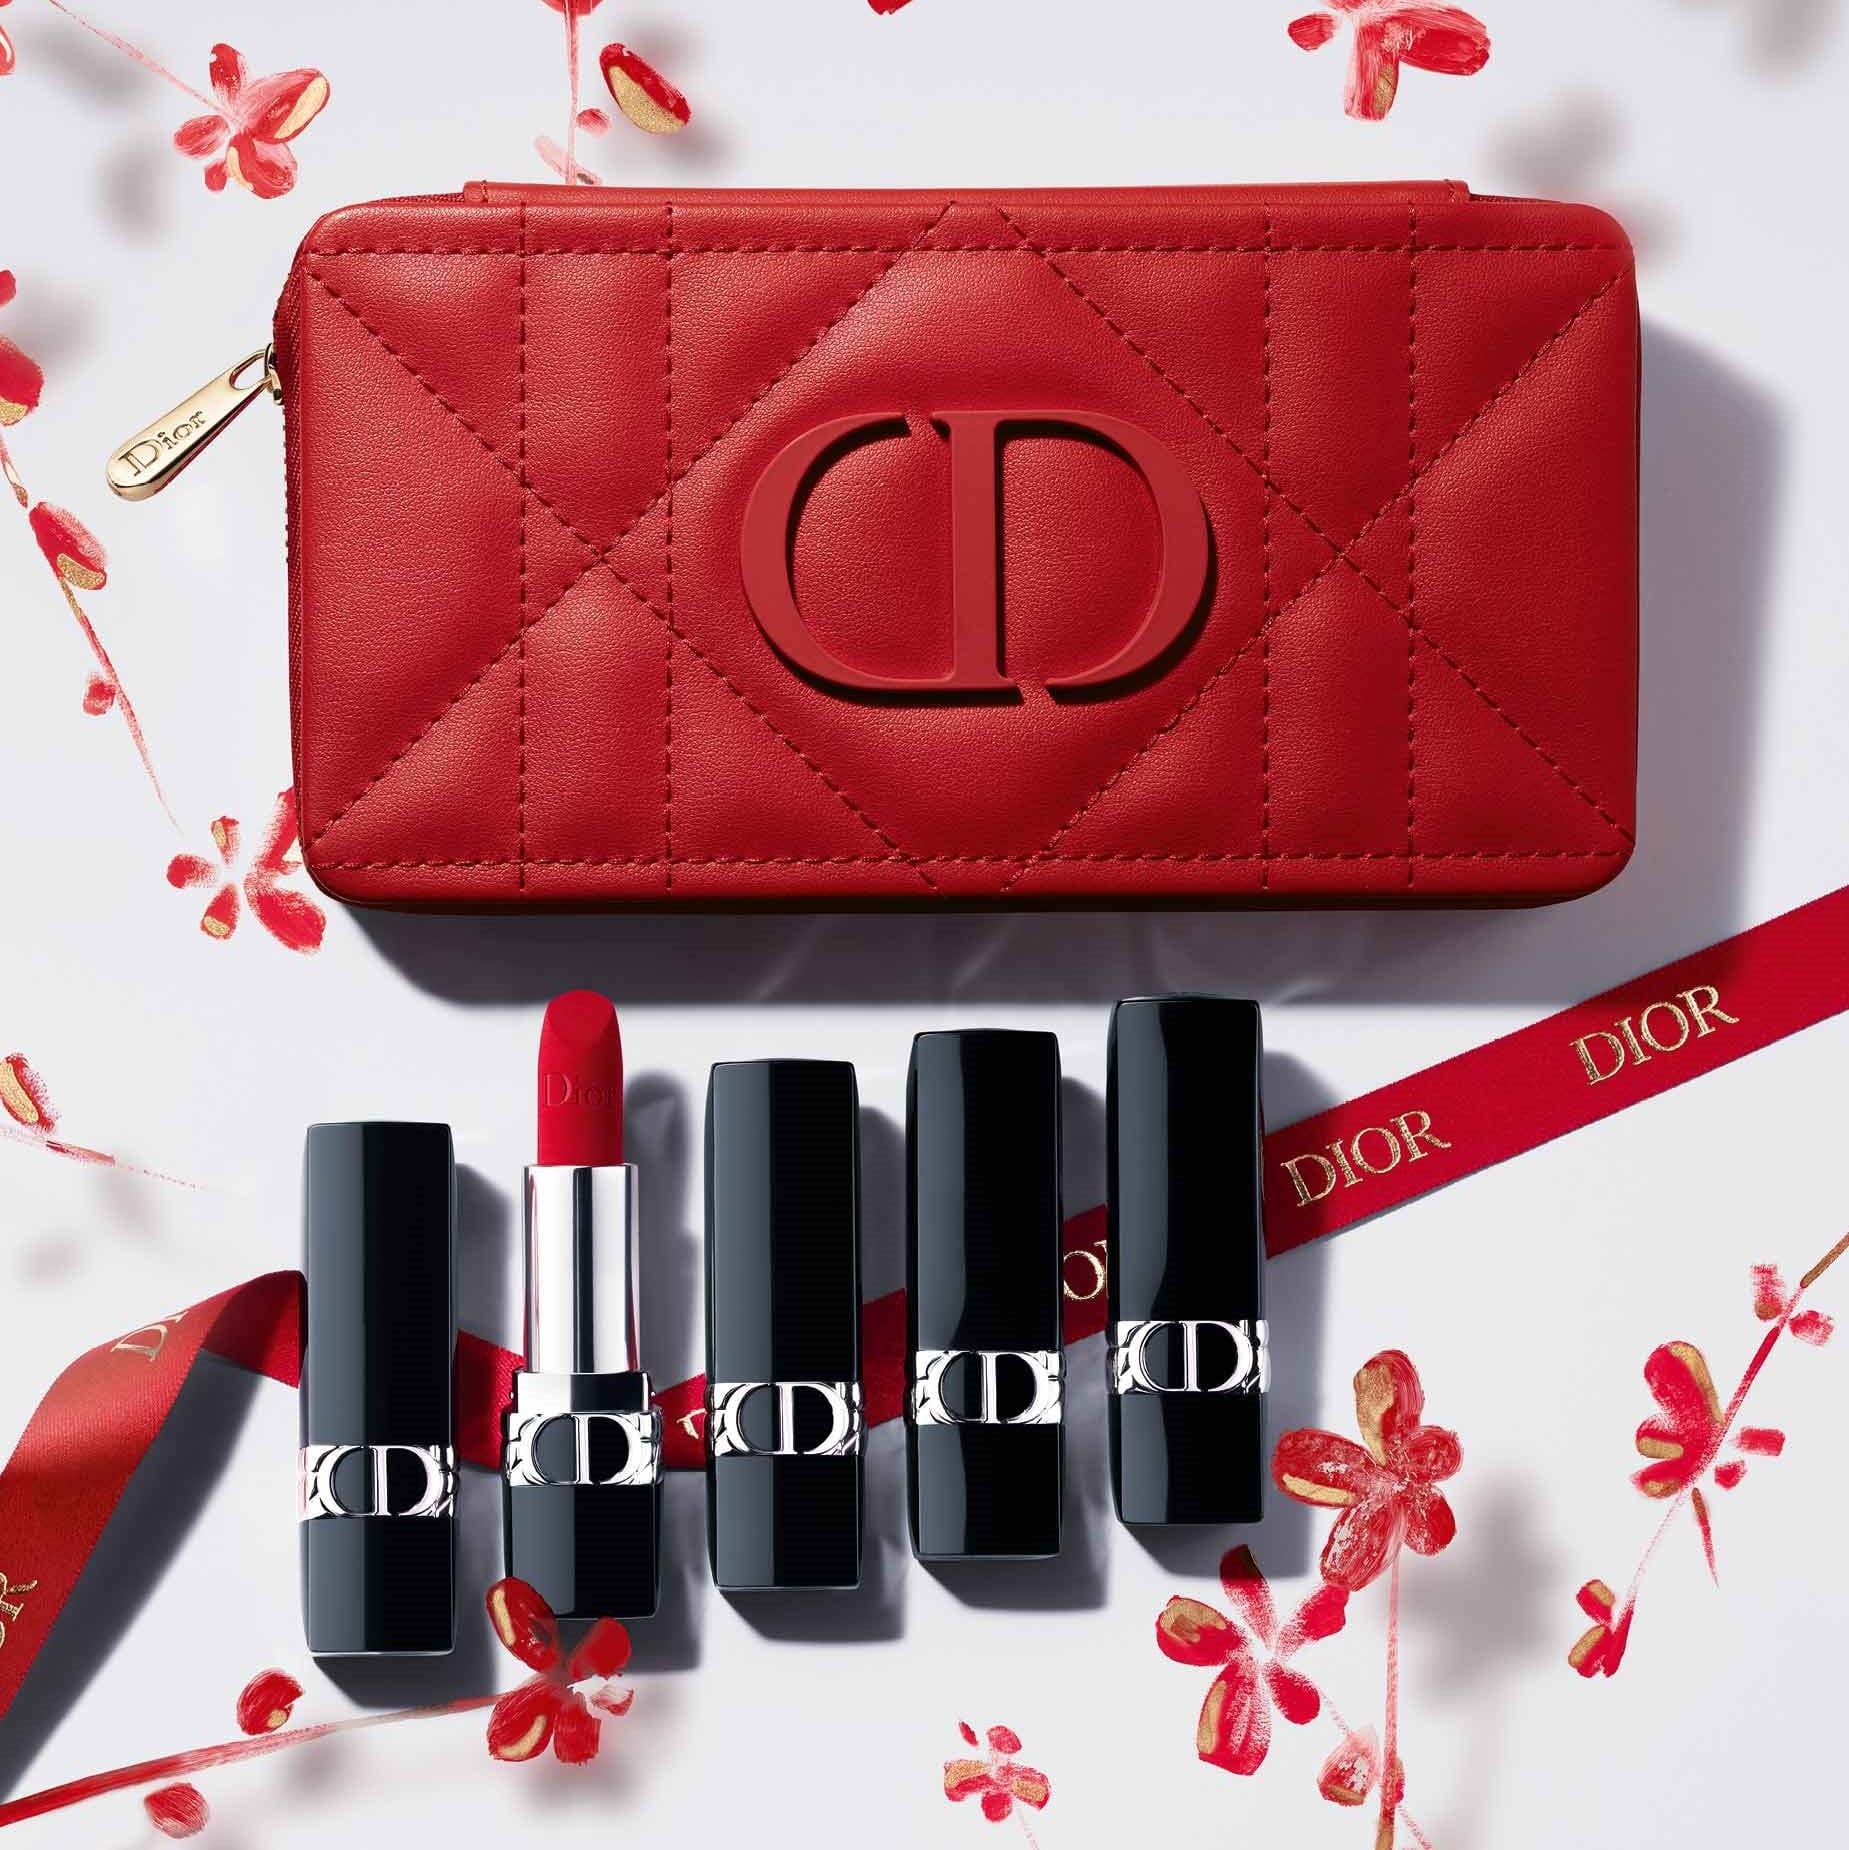 dior rouge kiss & love code couture lipstick set